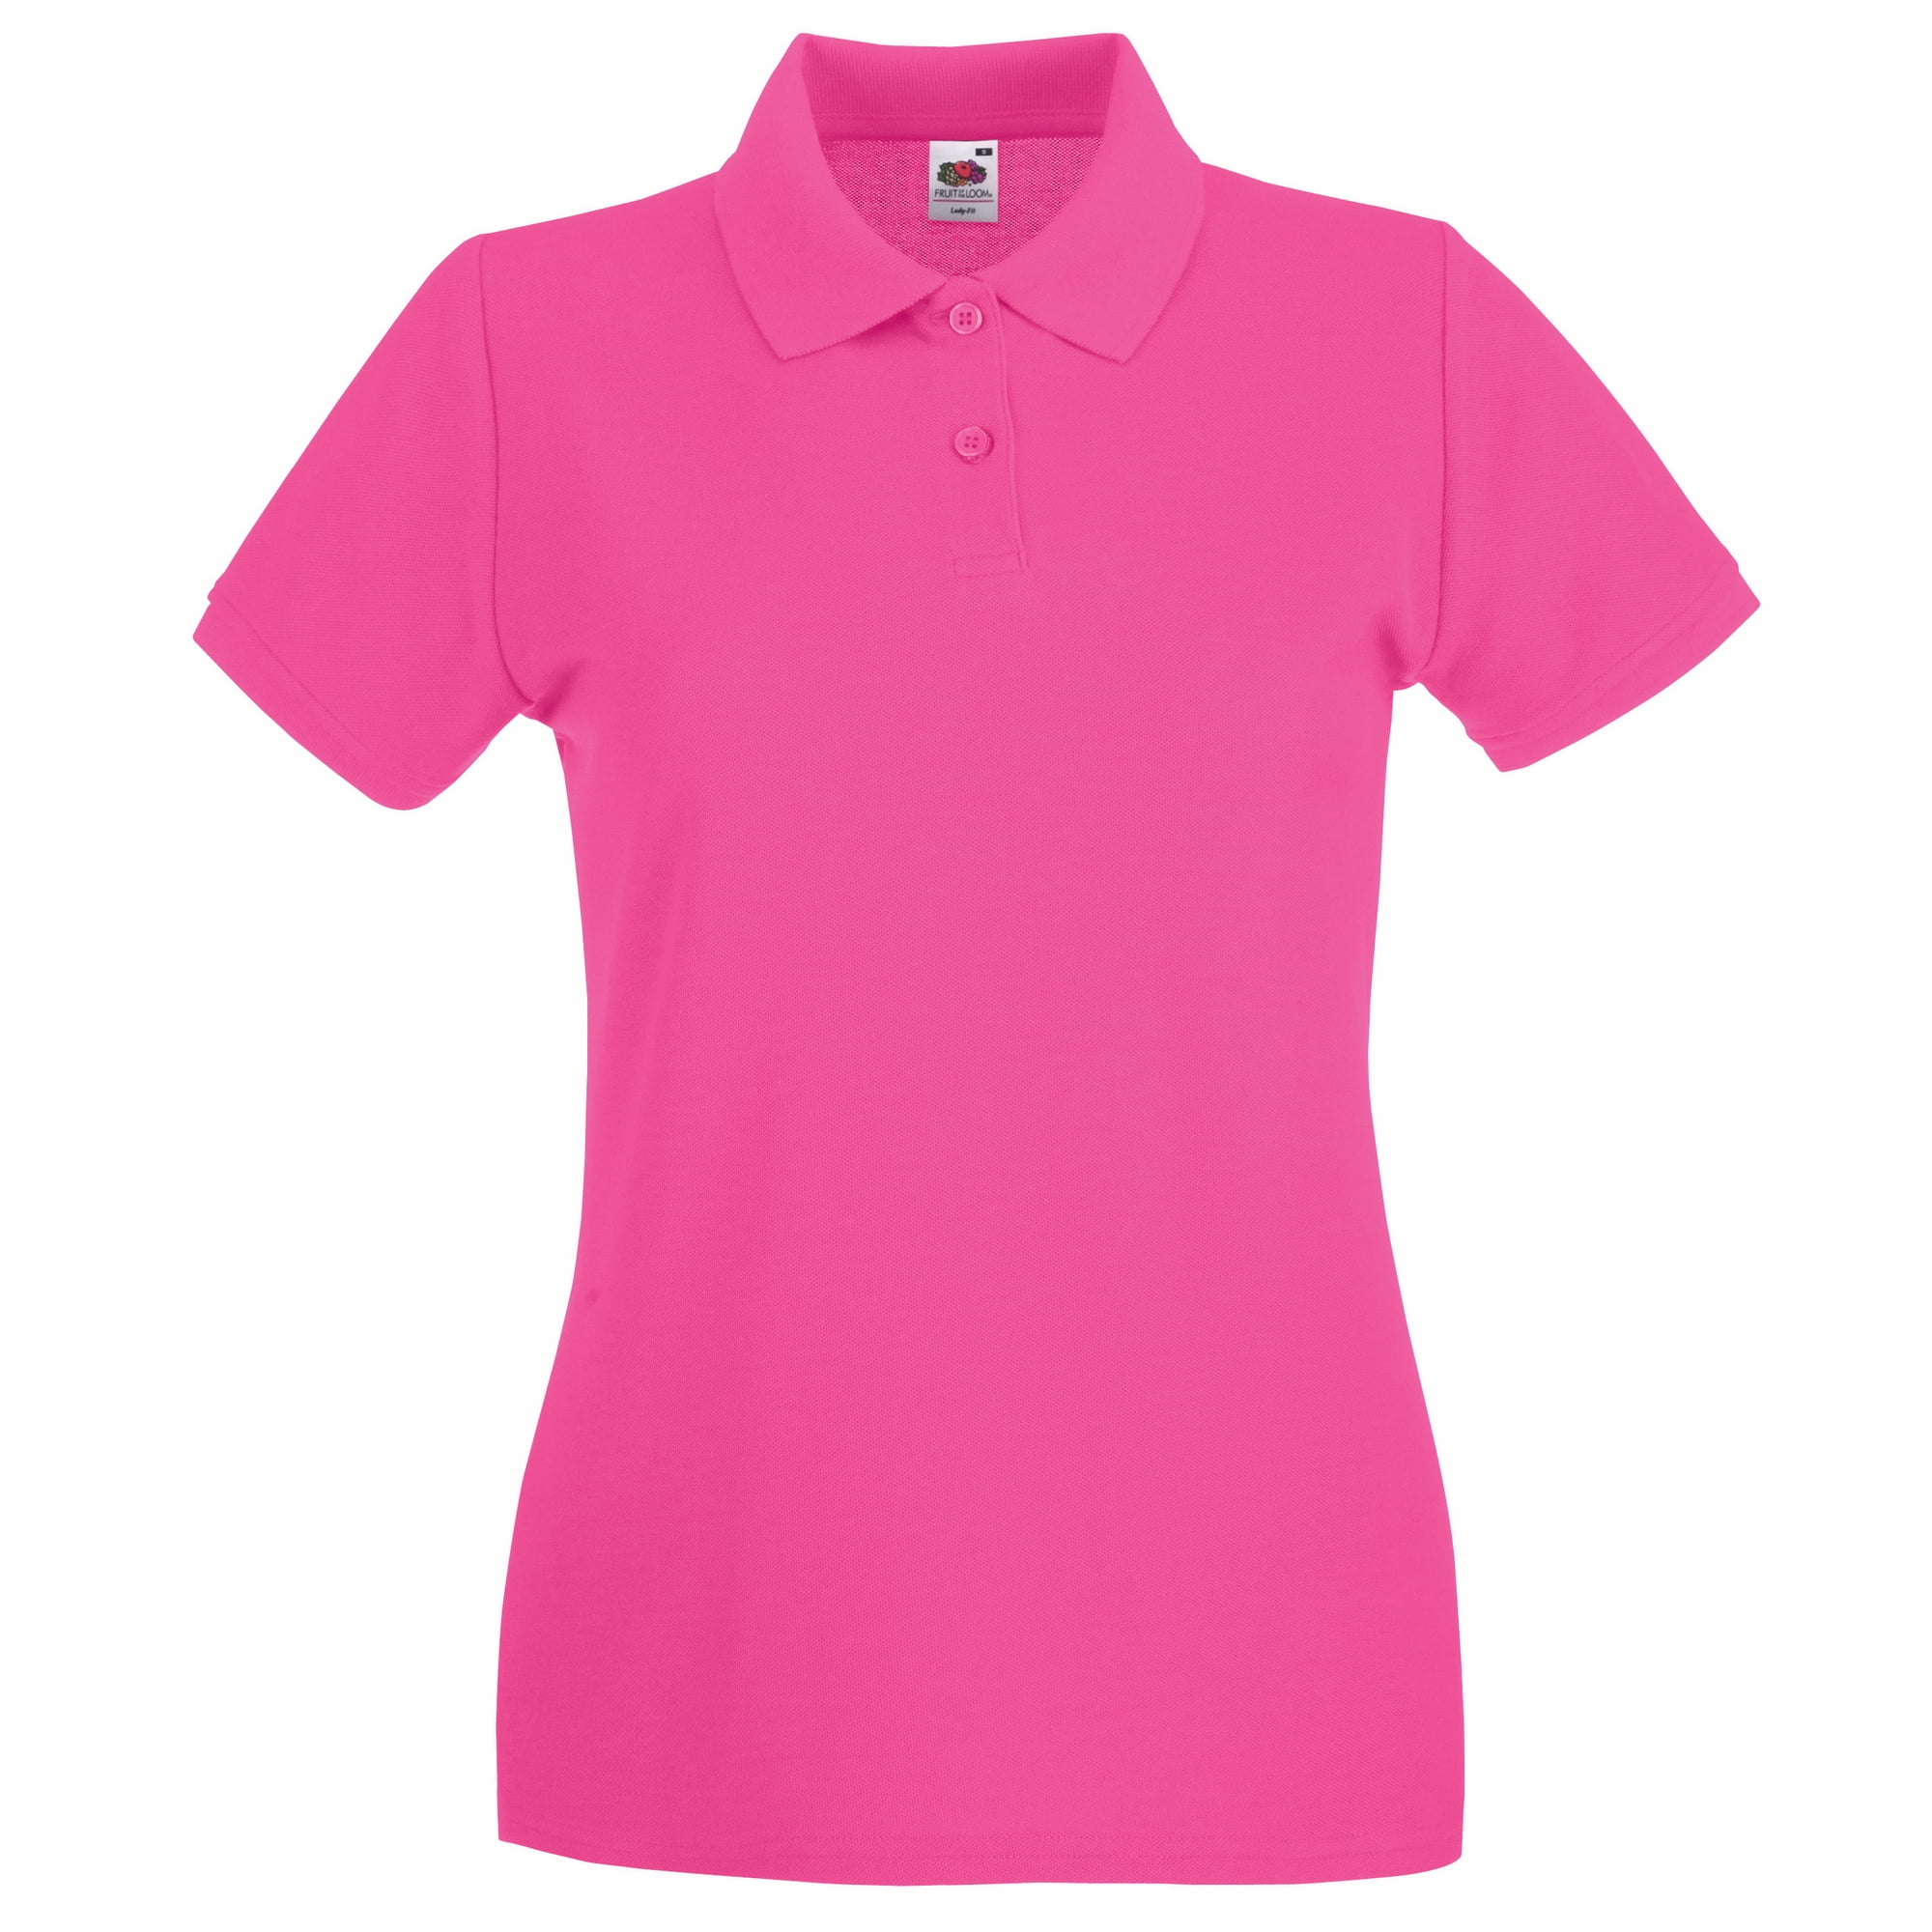 Fruit of the Loom Womens Fit Premium Short Sleeve Polo Shirt